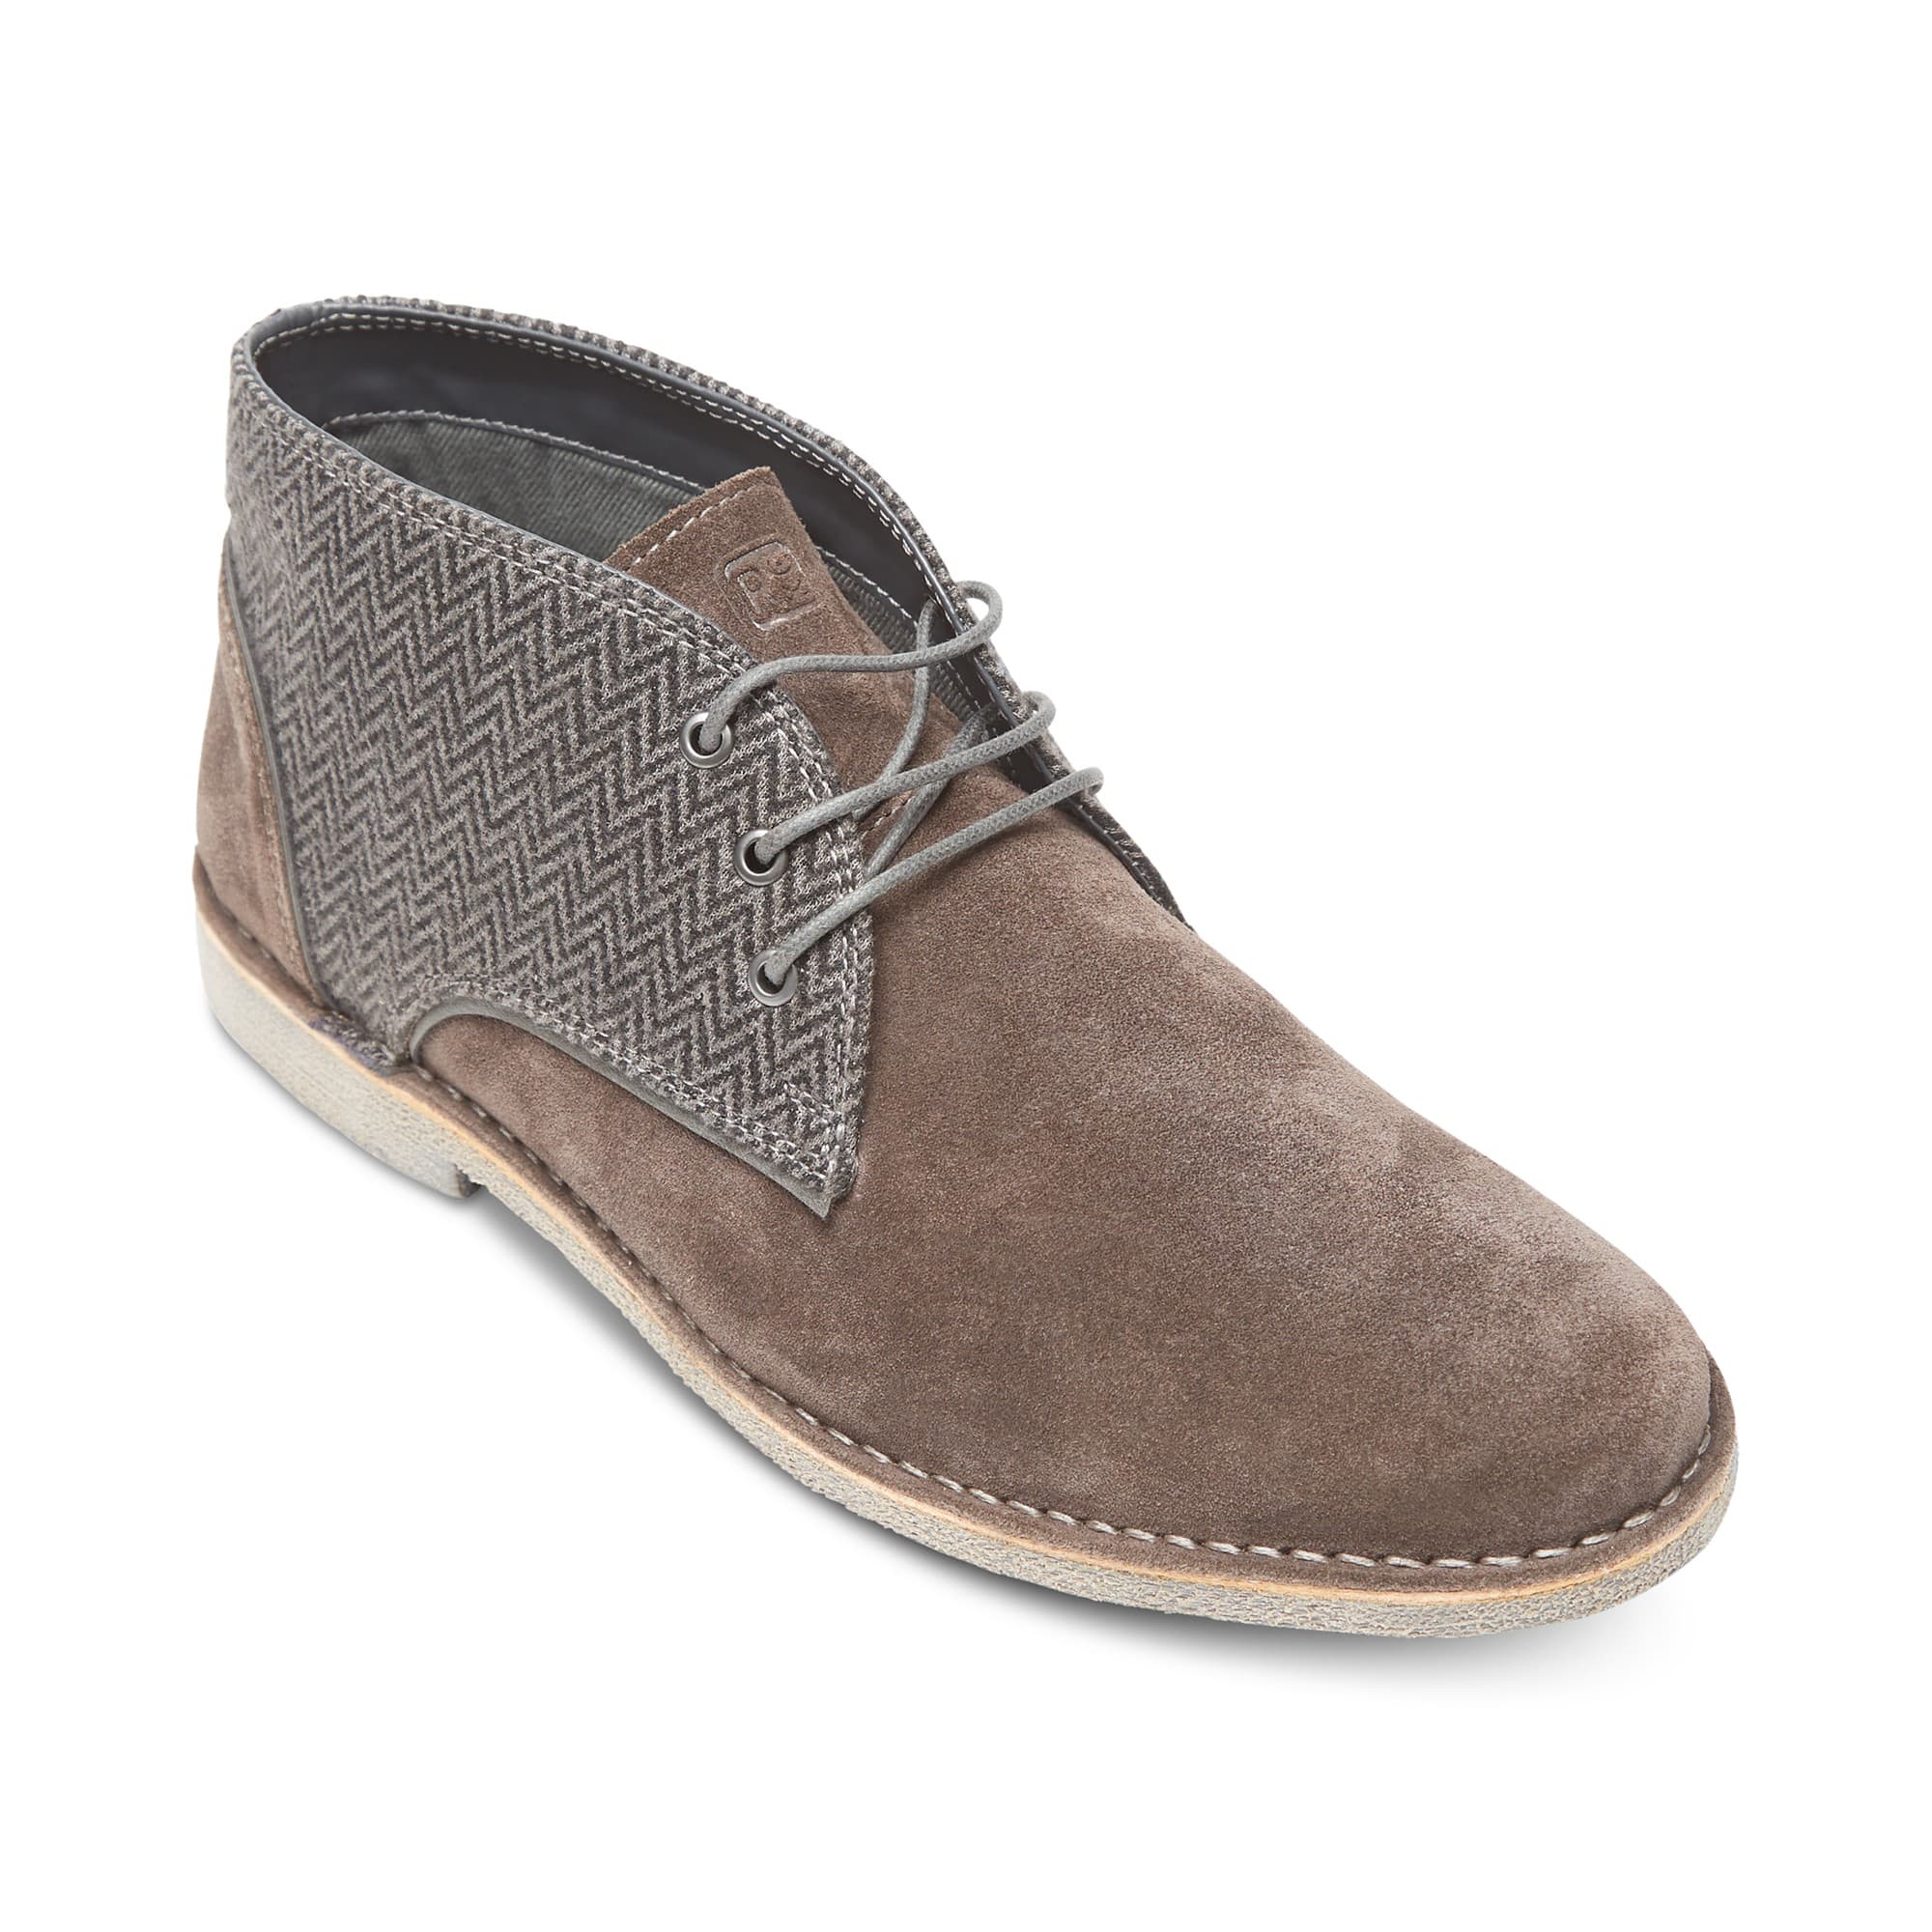 woocommerce-673321-2209615.cloudwaysapps.com-kenneth-cole-reaction-mens-grey-suede-passage-chukka-boots